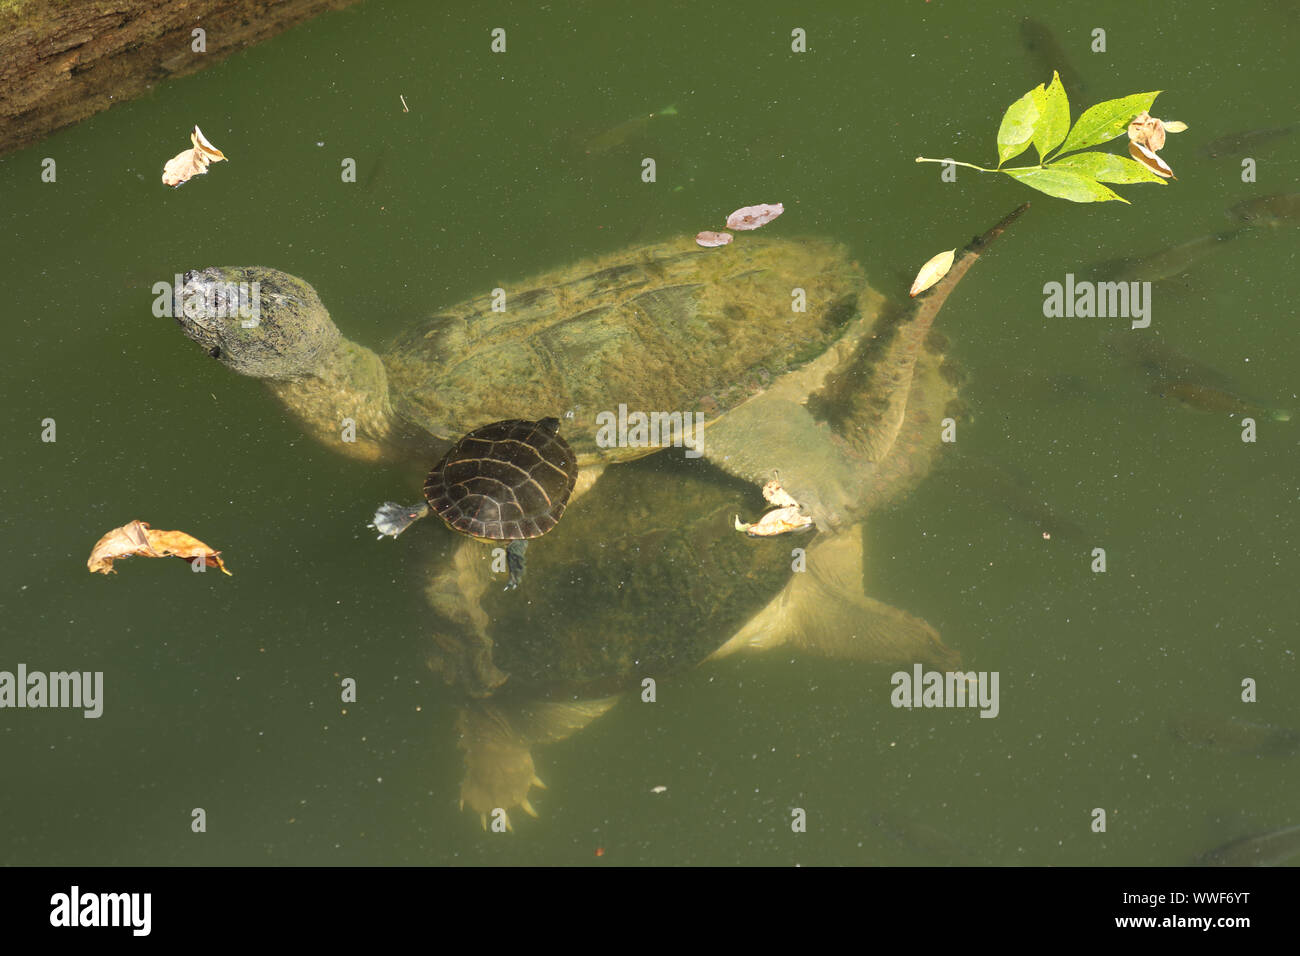 snapping turtles, mating, Chelydra serpentina, with bluegills, and painted turtle (Chrysemys picta),feeding on the algae on turtle's carapace, Marylan Stock Photo